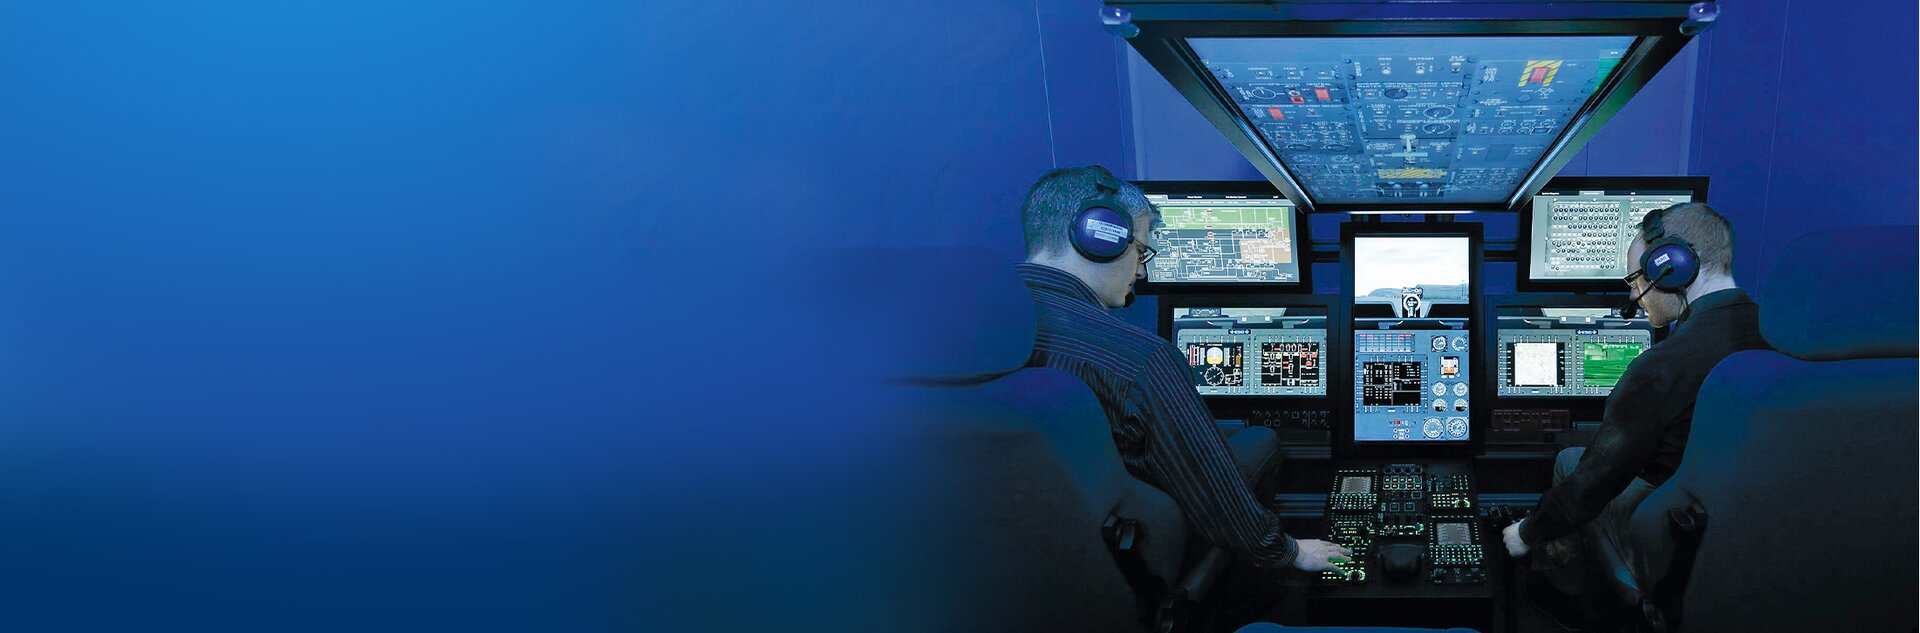 The Cockpit Procedure Trainers are used in the training of pilots and maintenance personnel.